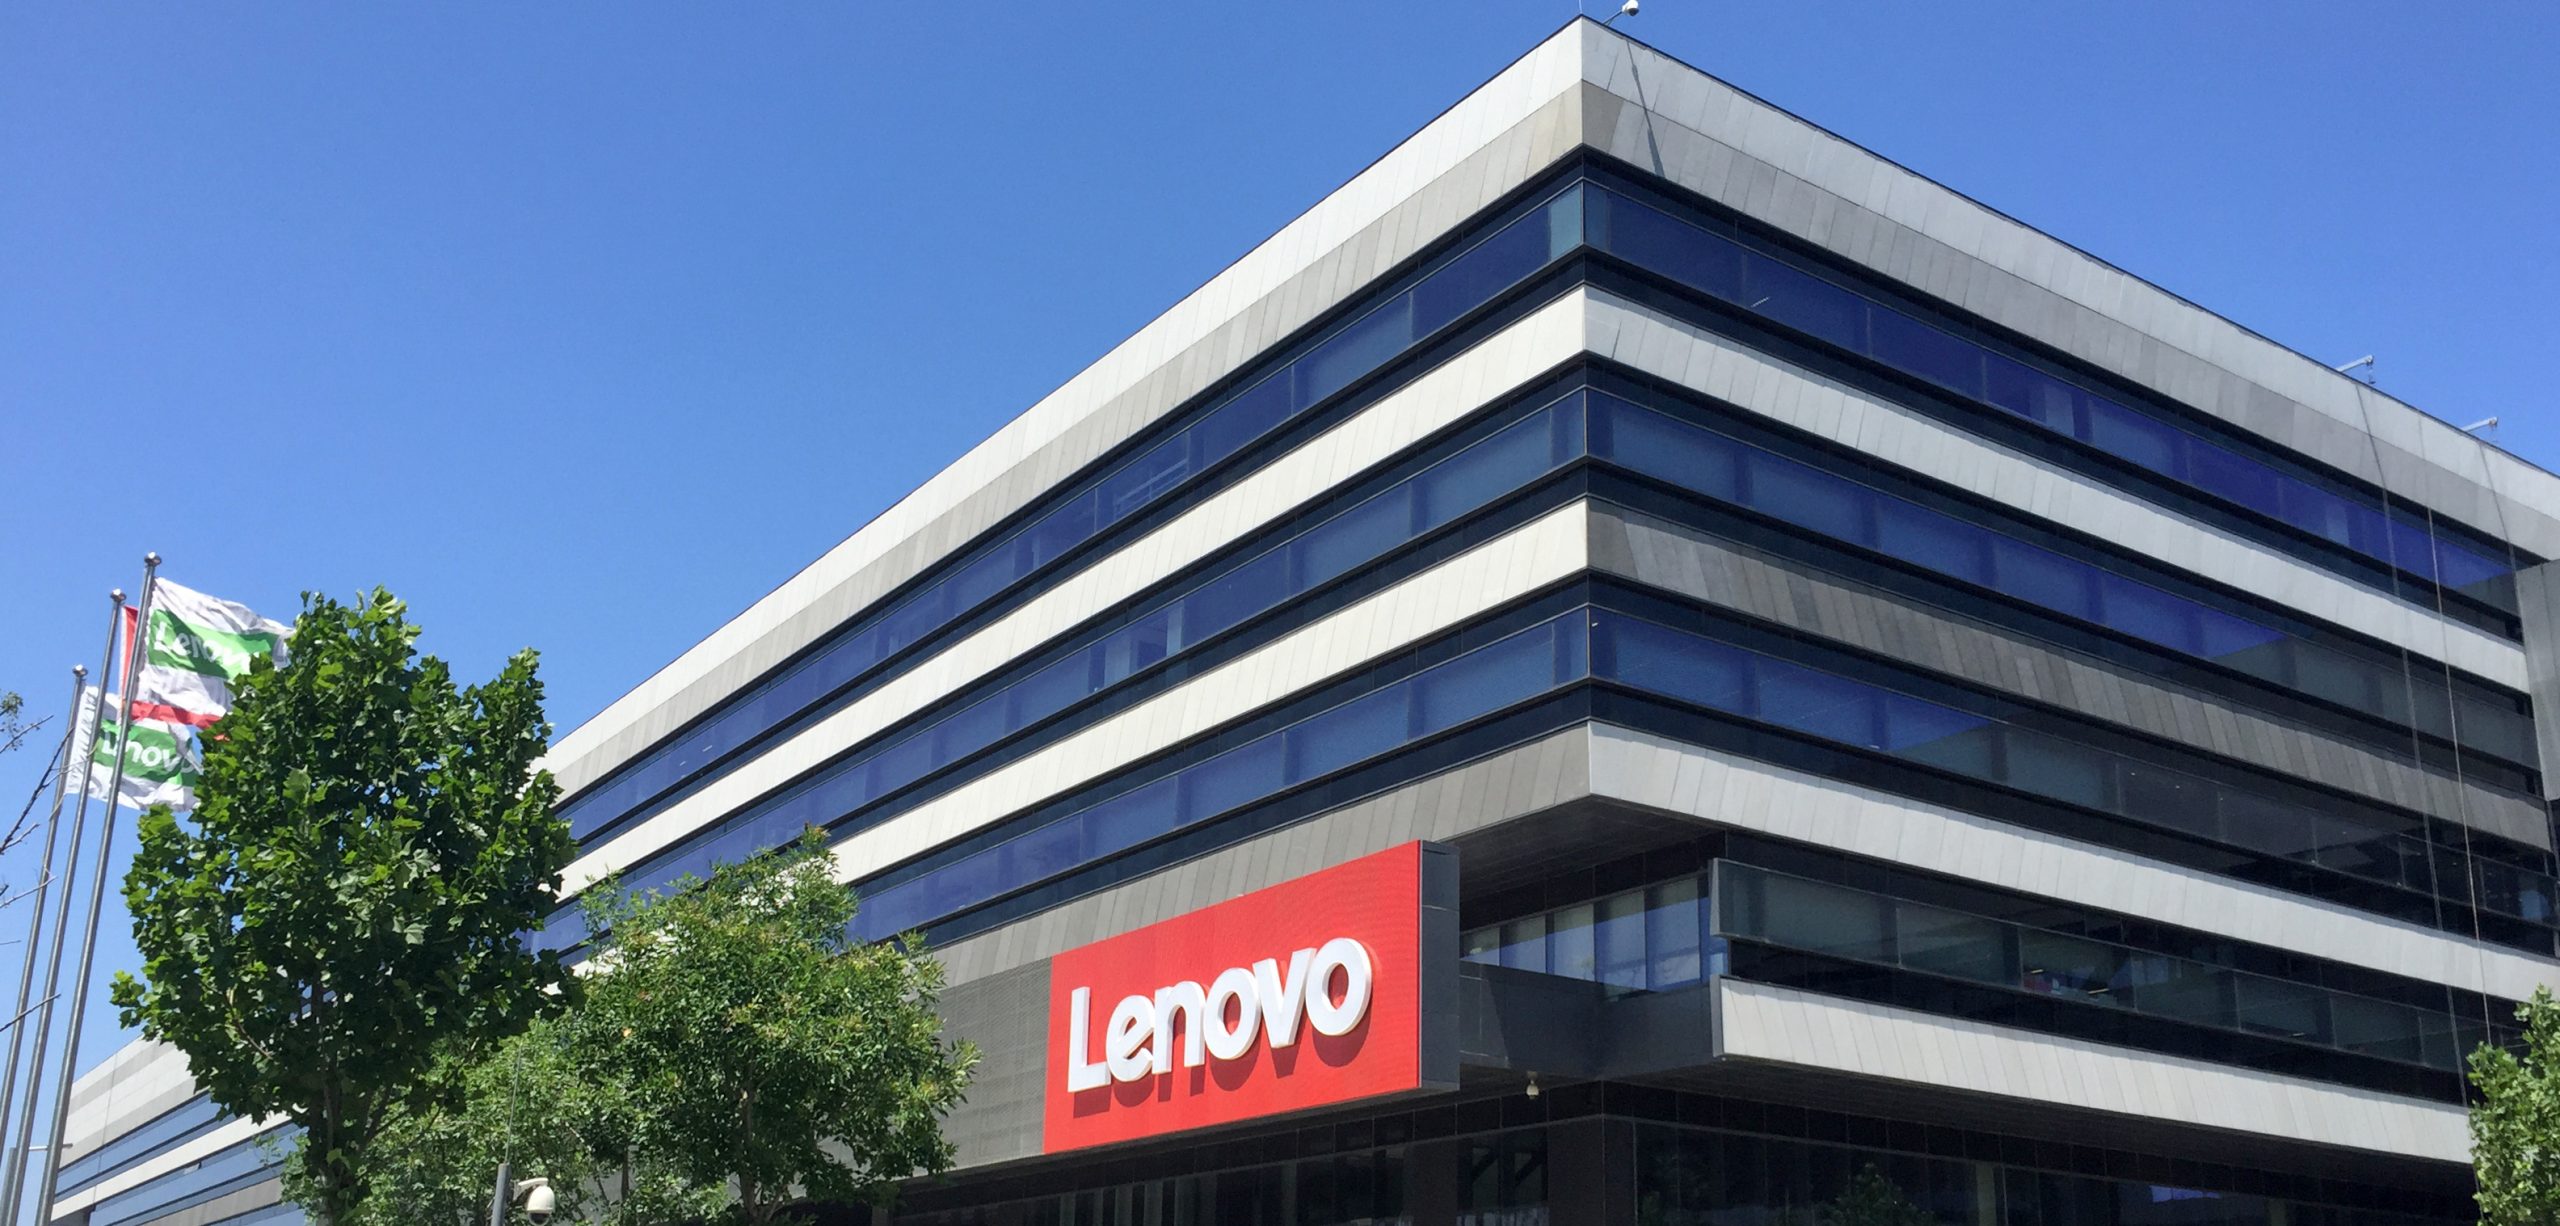 Lenovo releases job postings in the auto industry, possibly joining the car manufacturing industry.